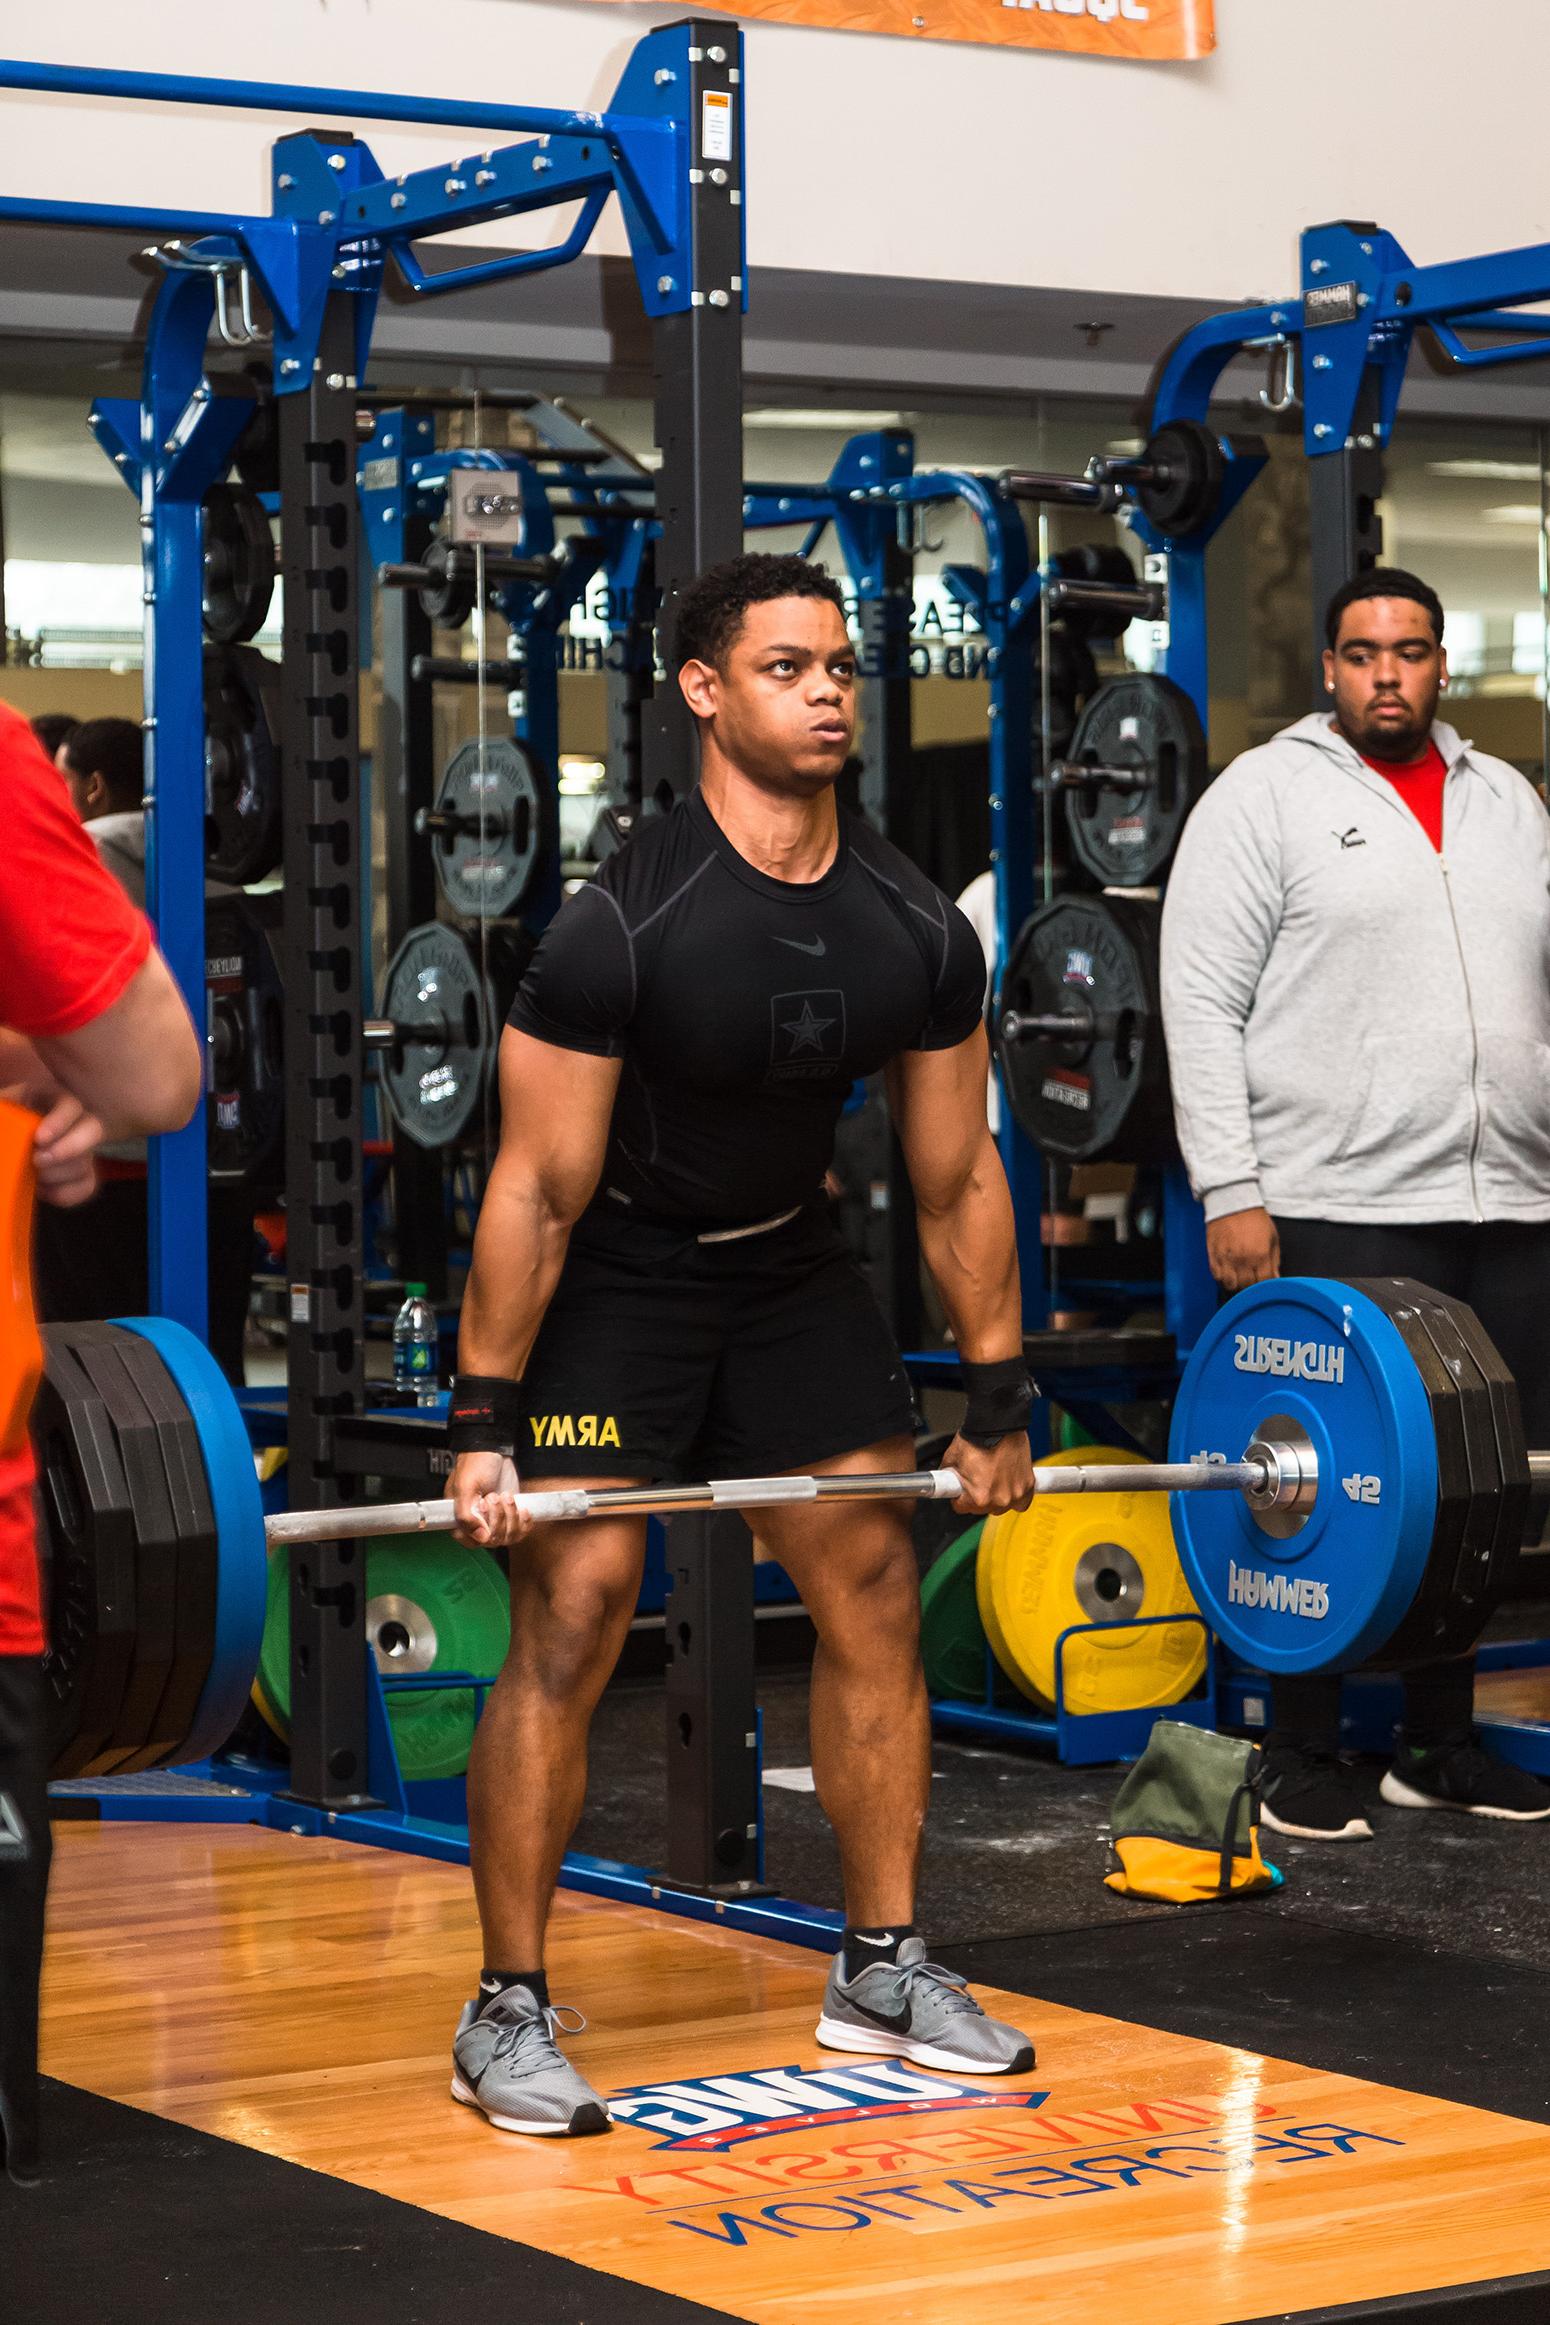 Student with army shorts doing a deadlift at the Campus Center during a powerlifting competition